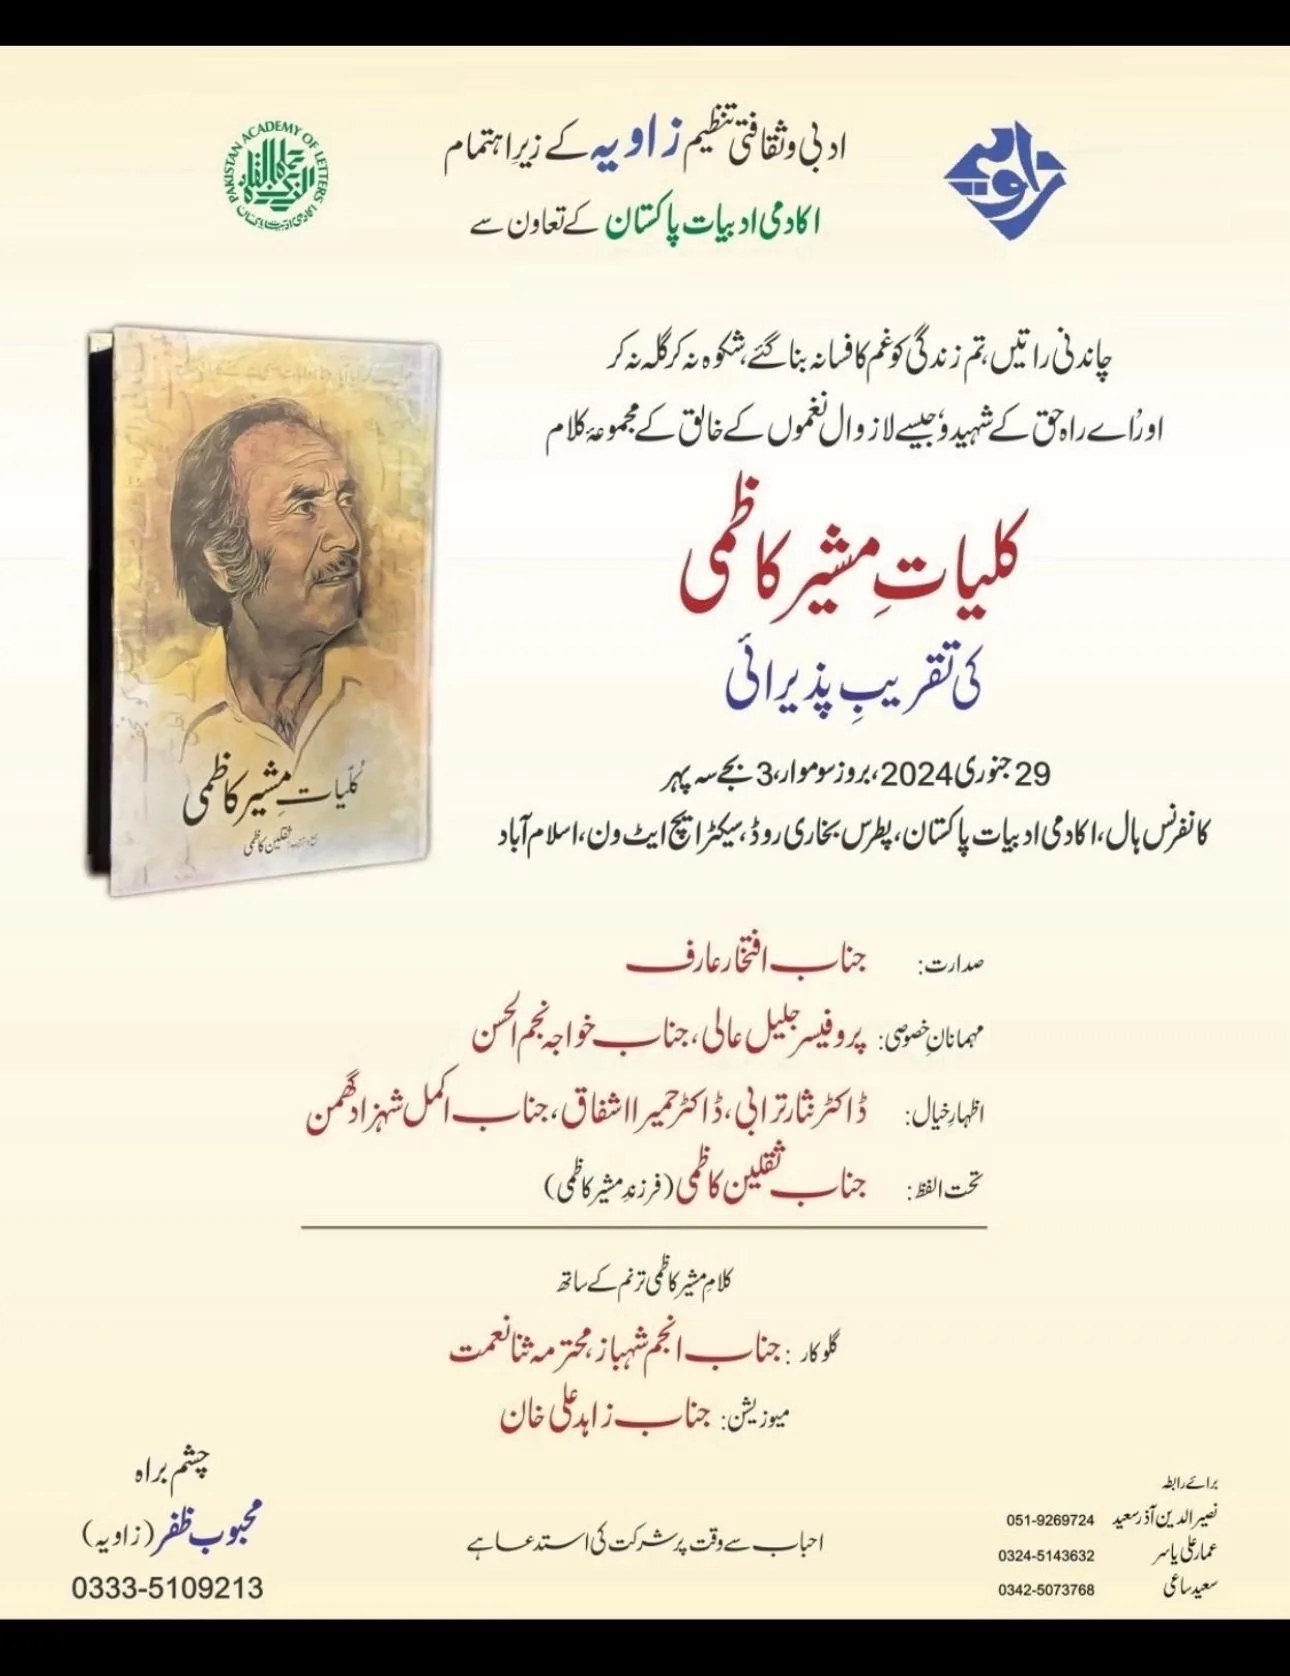 Book launching ceremony of compilation of poetry of Mushir Kazmi to be held on January 29 in Islamabad